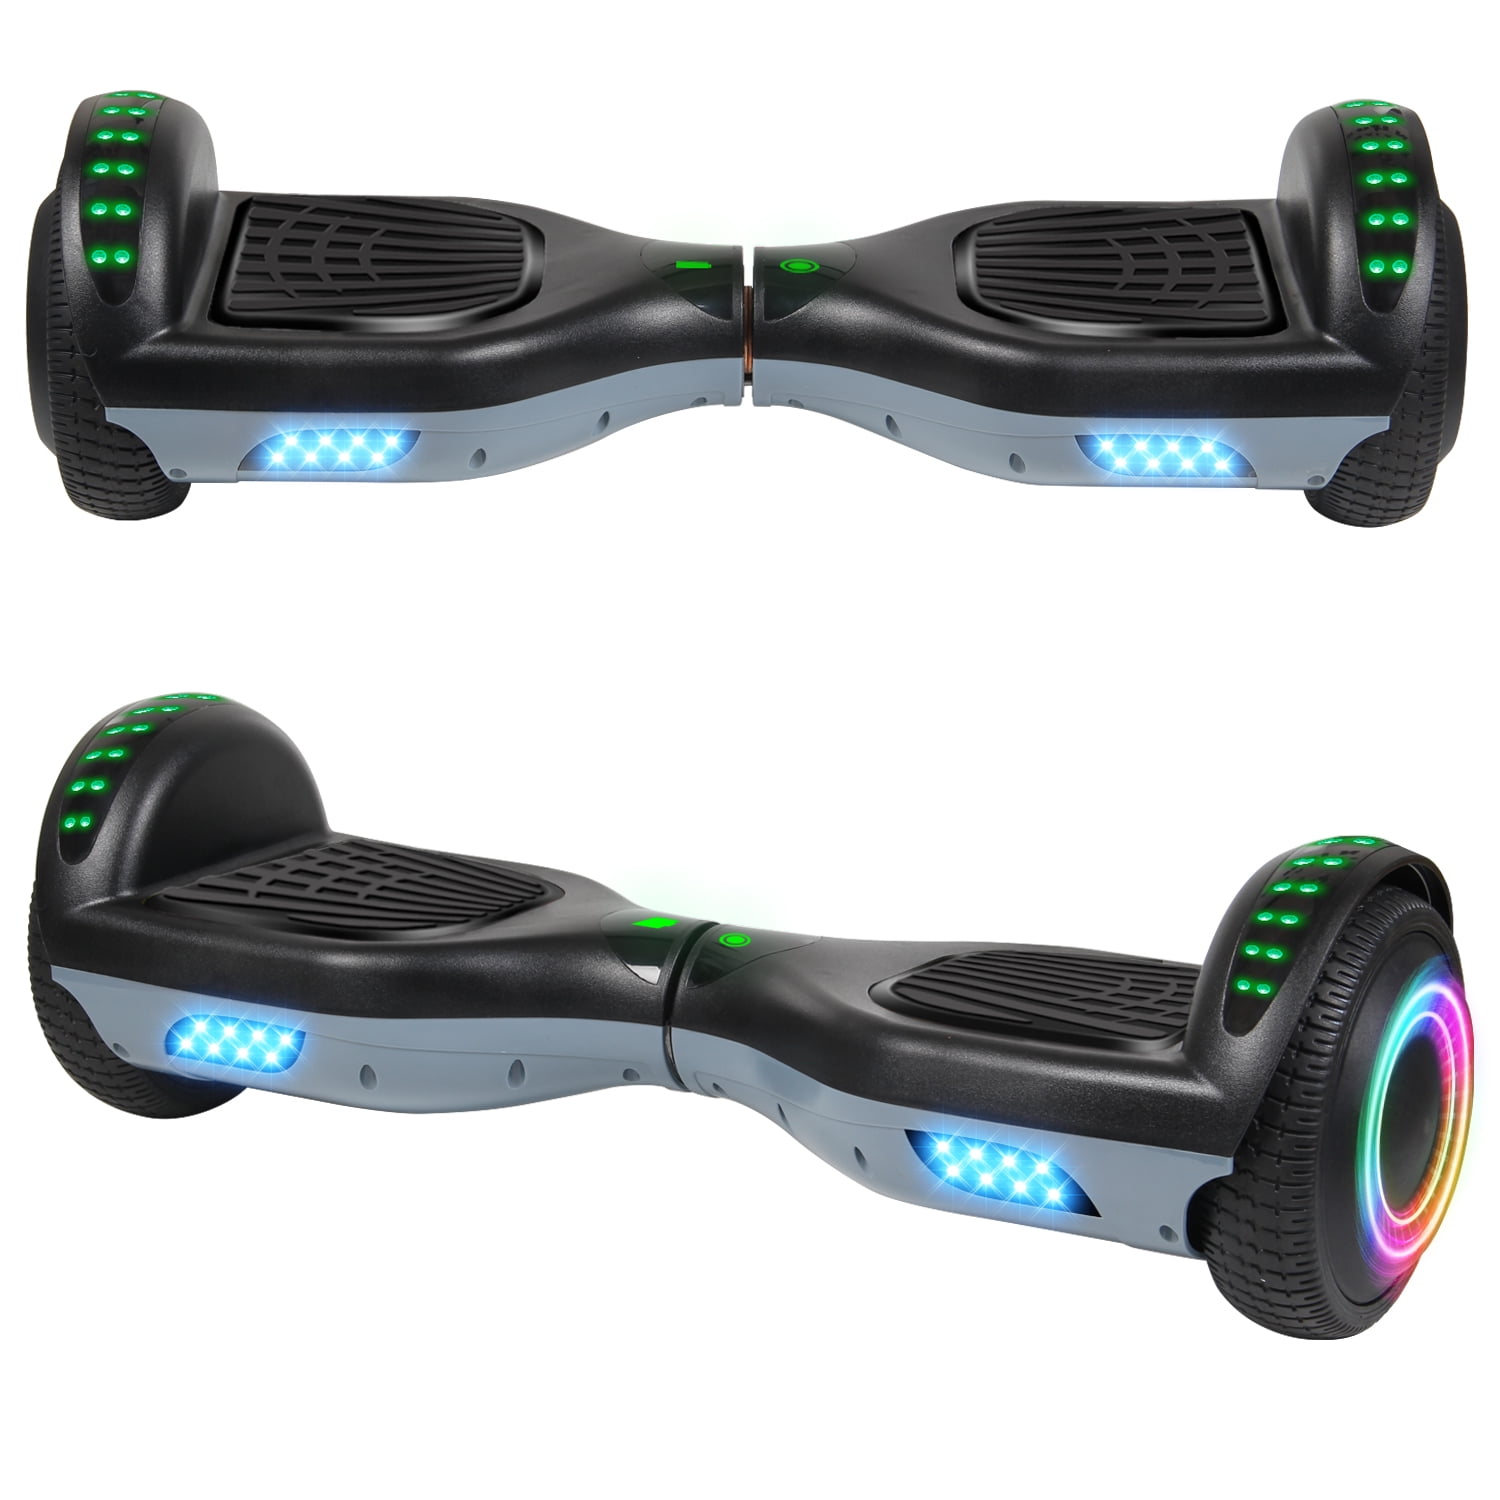 Best Gift for Kids SISGAD Hoverboards 300W Motor Hoverboard for Kids Self Balancing Electric Scooter 6.5 Hoverboard Bluetooth Two Wheel Smart Hoverboard Board LED Light With 2